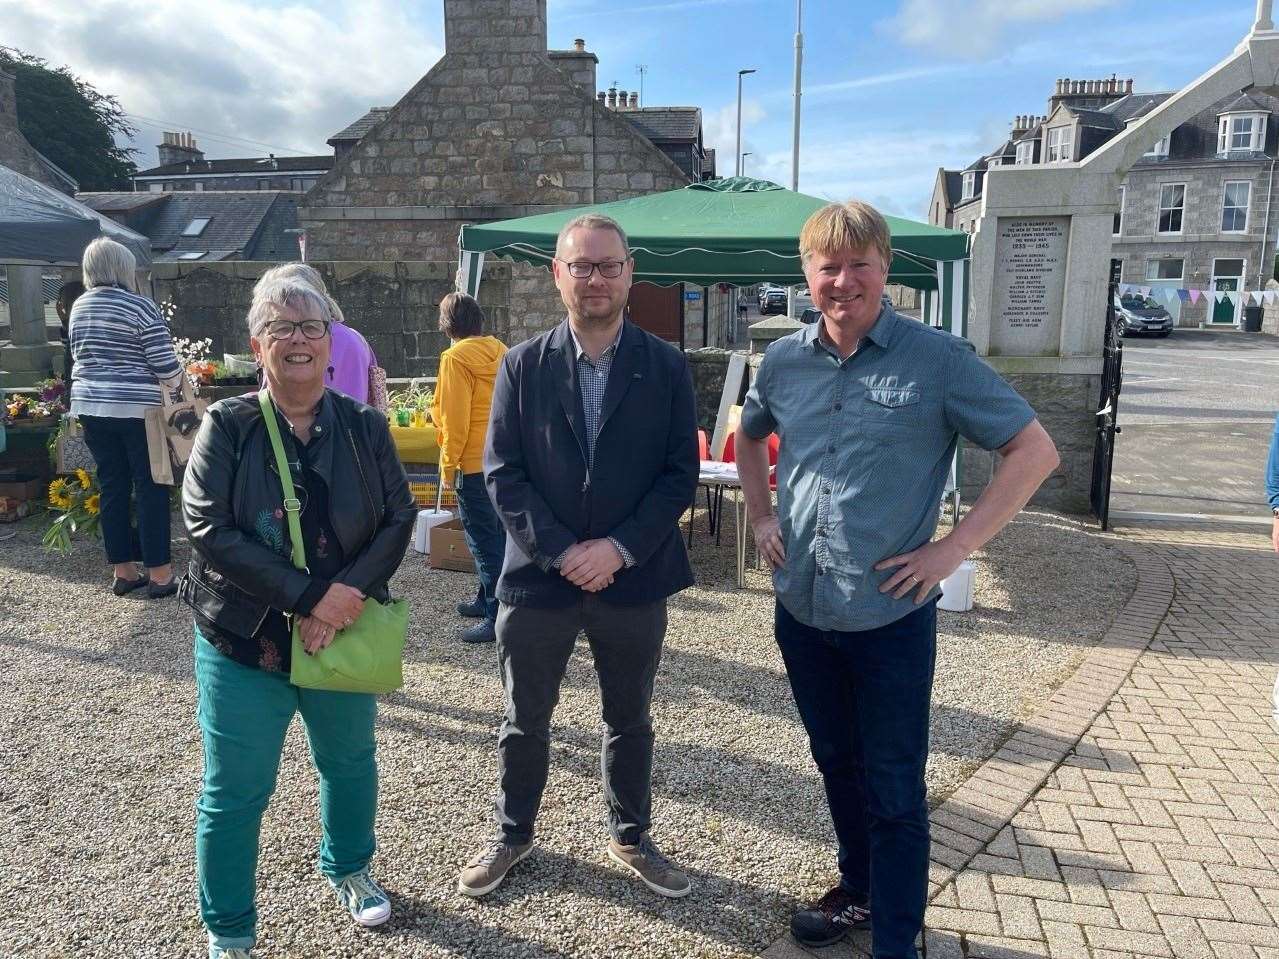 At the event are Val Reid from the Kintore Sustainability Group, MP Richard Thomson and Rev Neil Meyer of Kintore Parish Church.